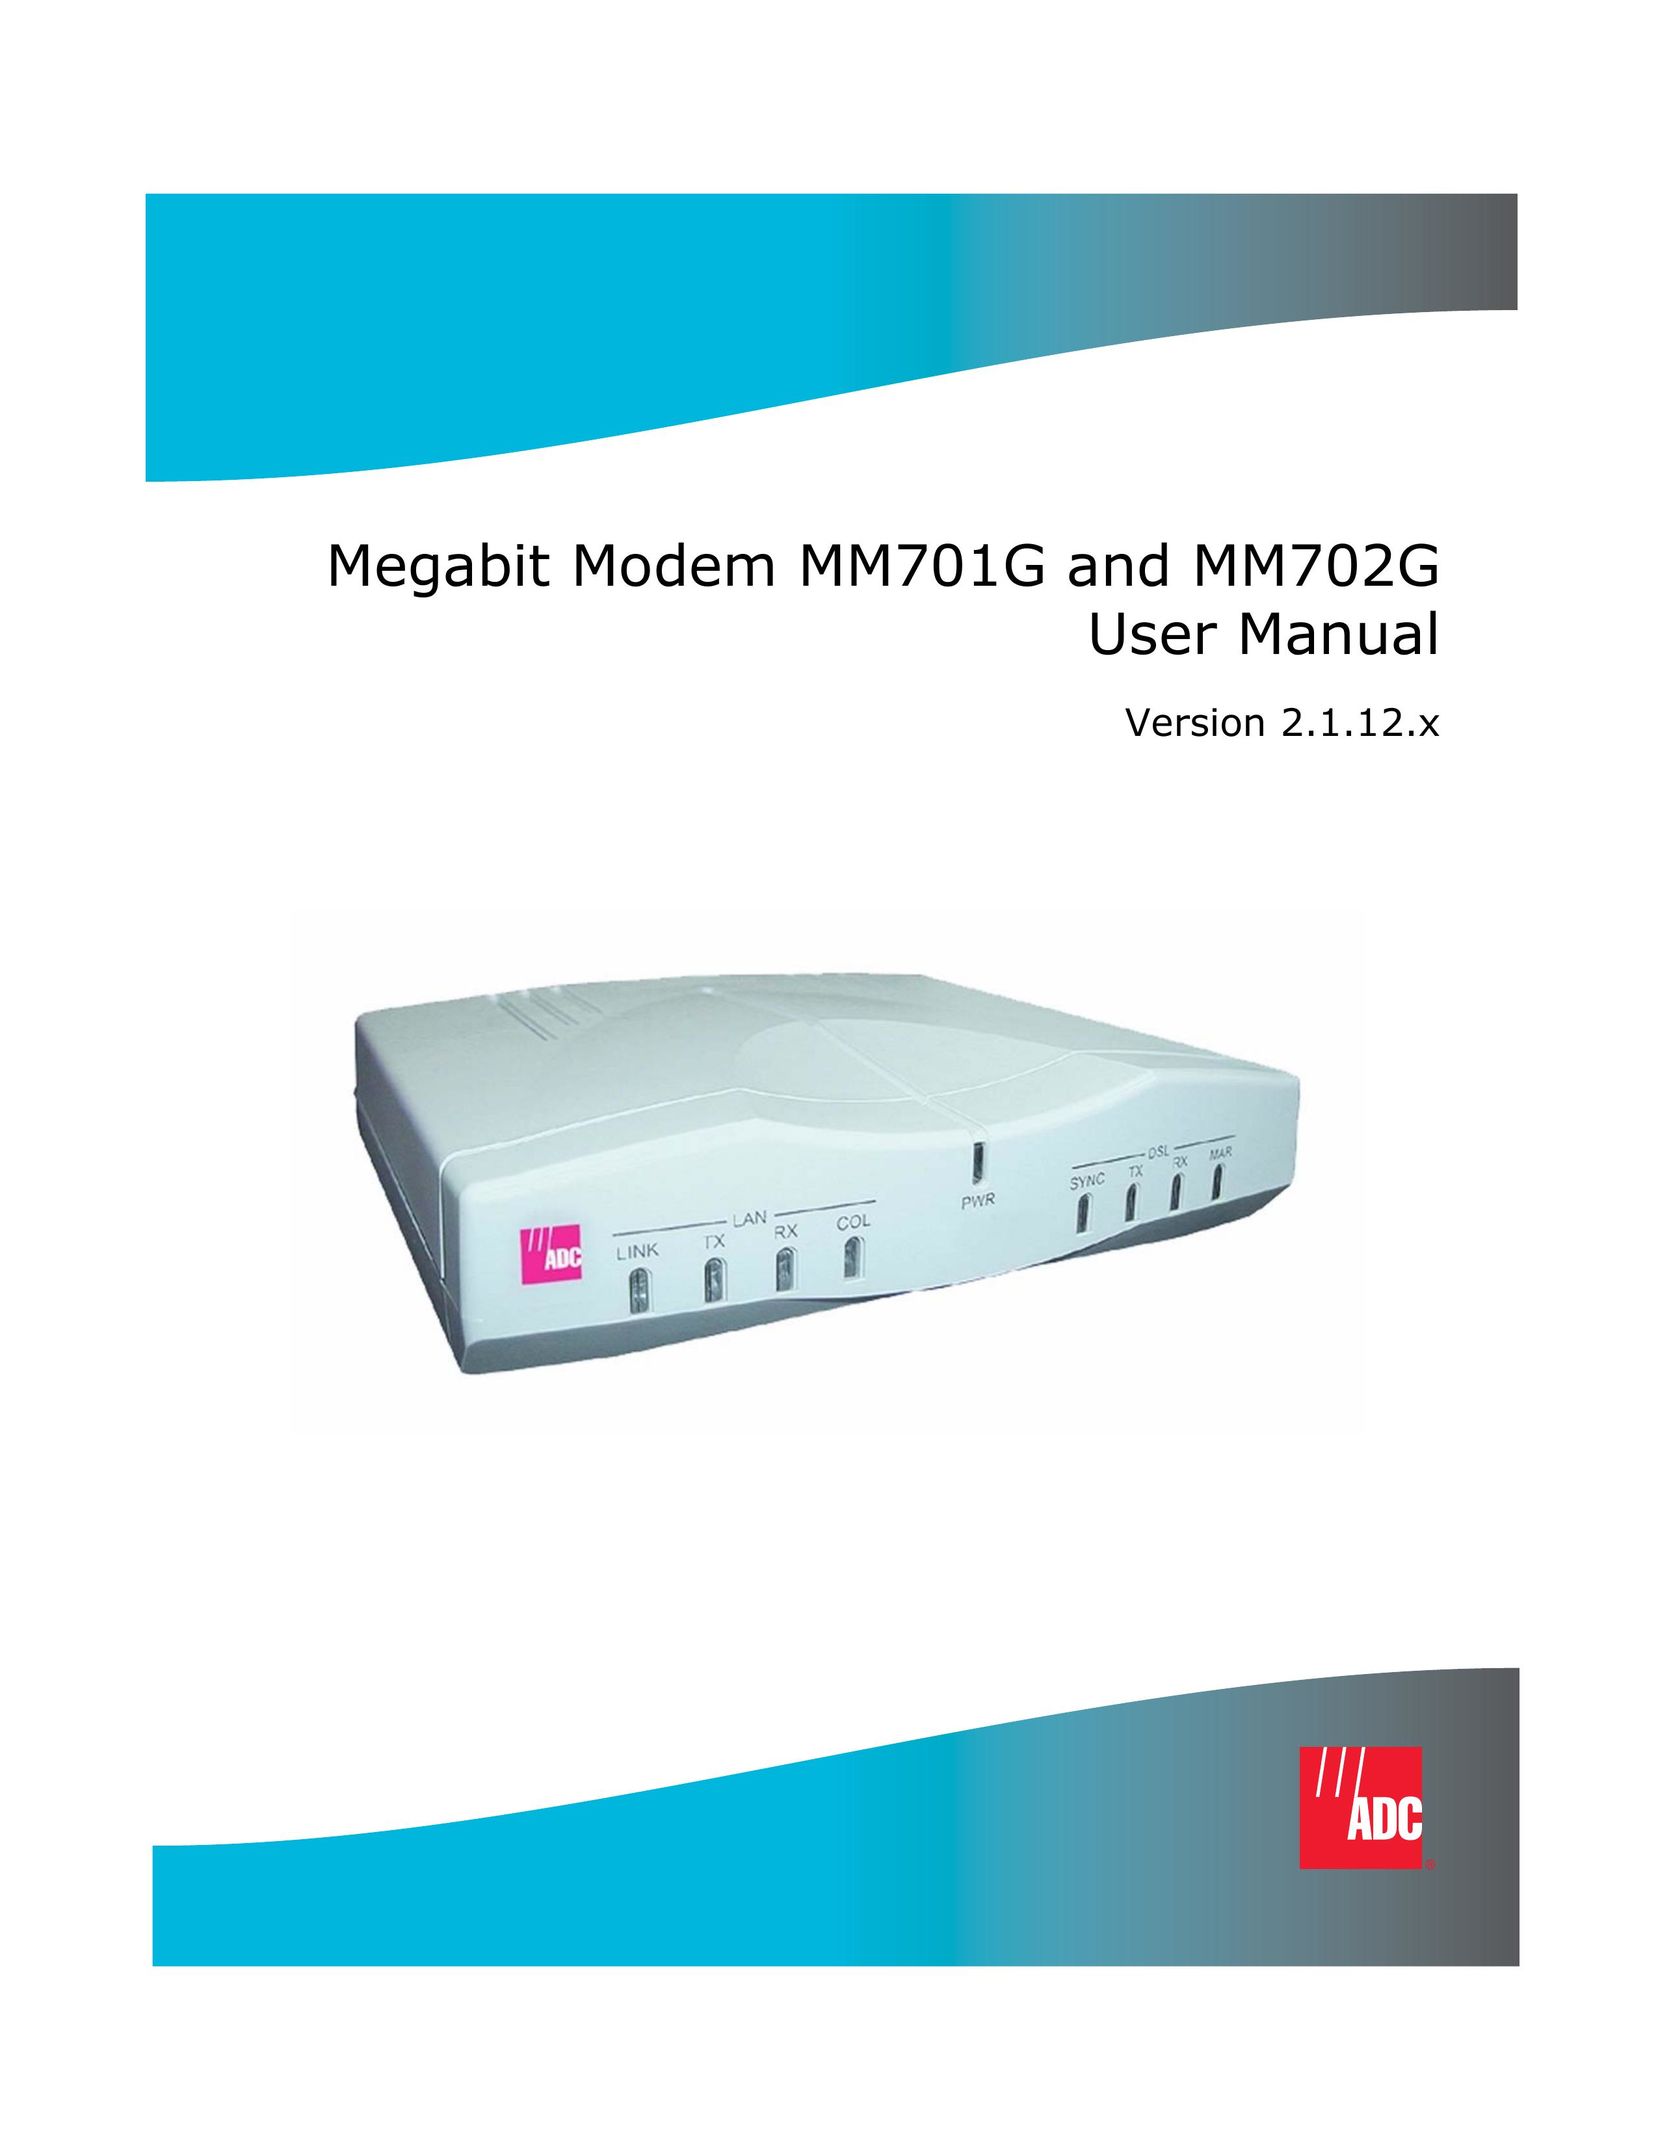 ADC MM702G Switch User Manual